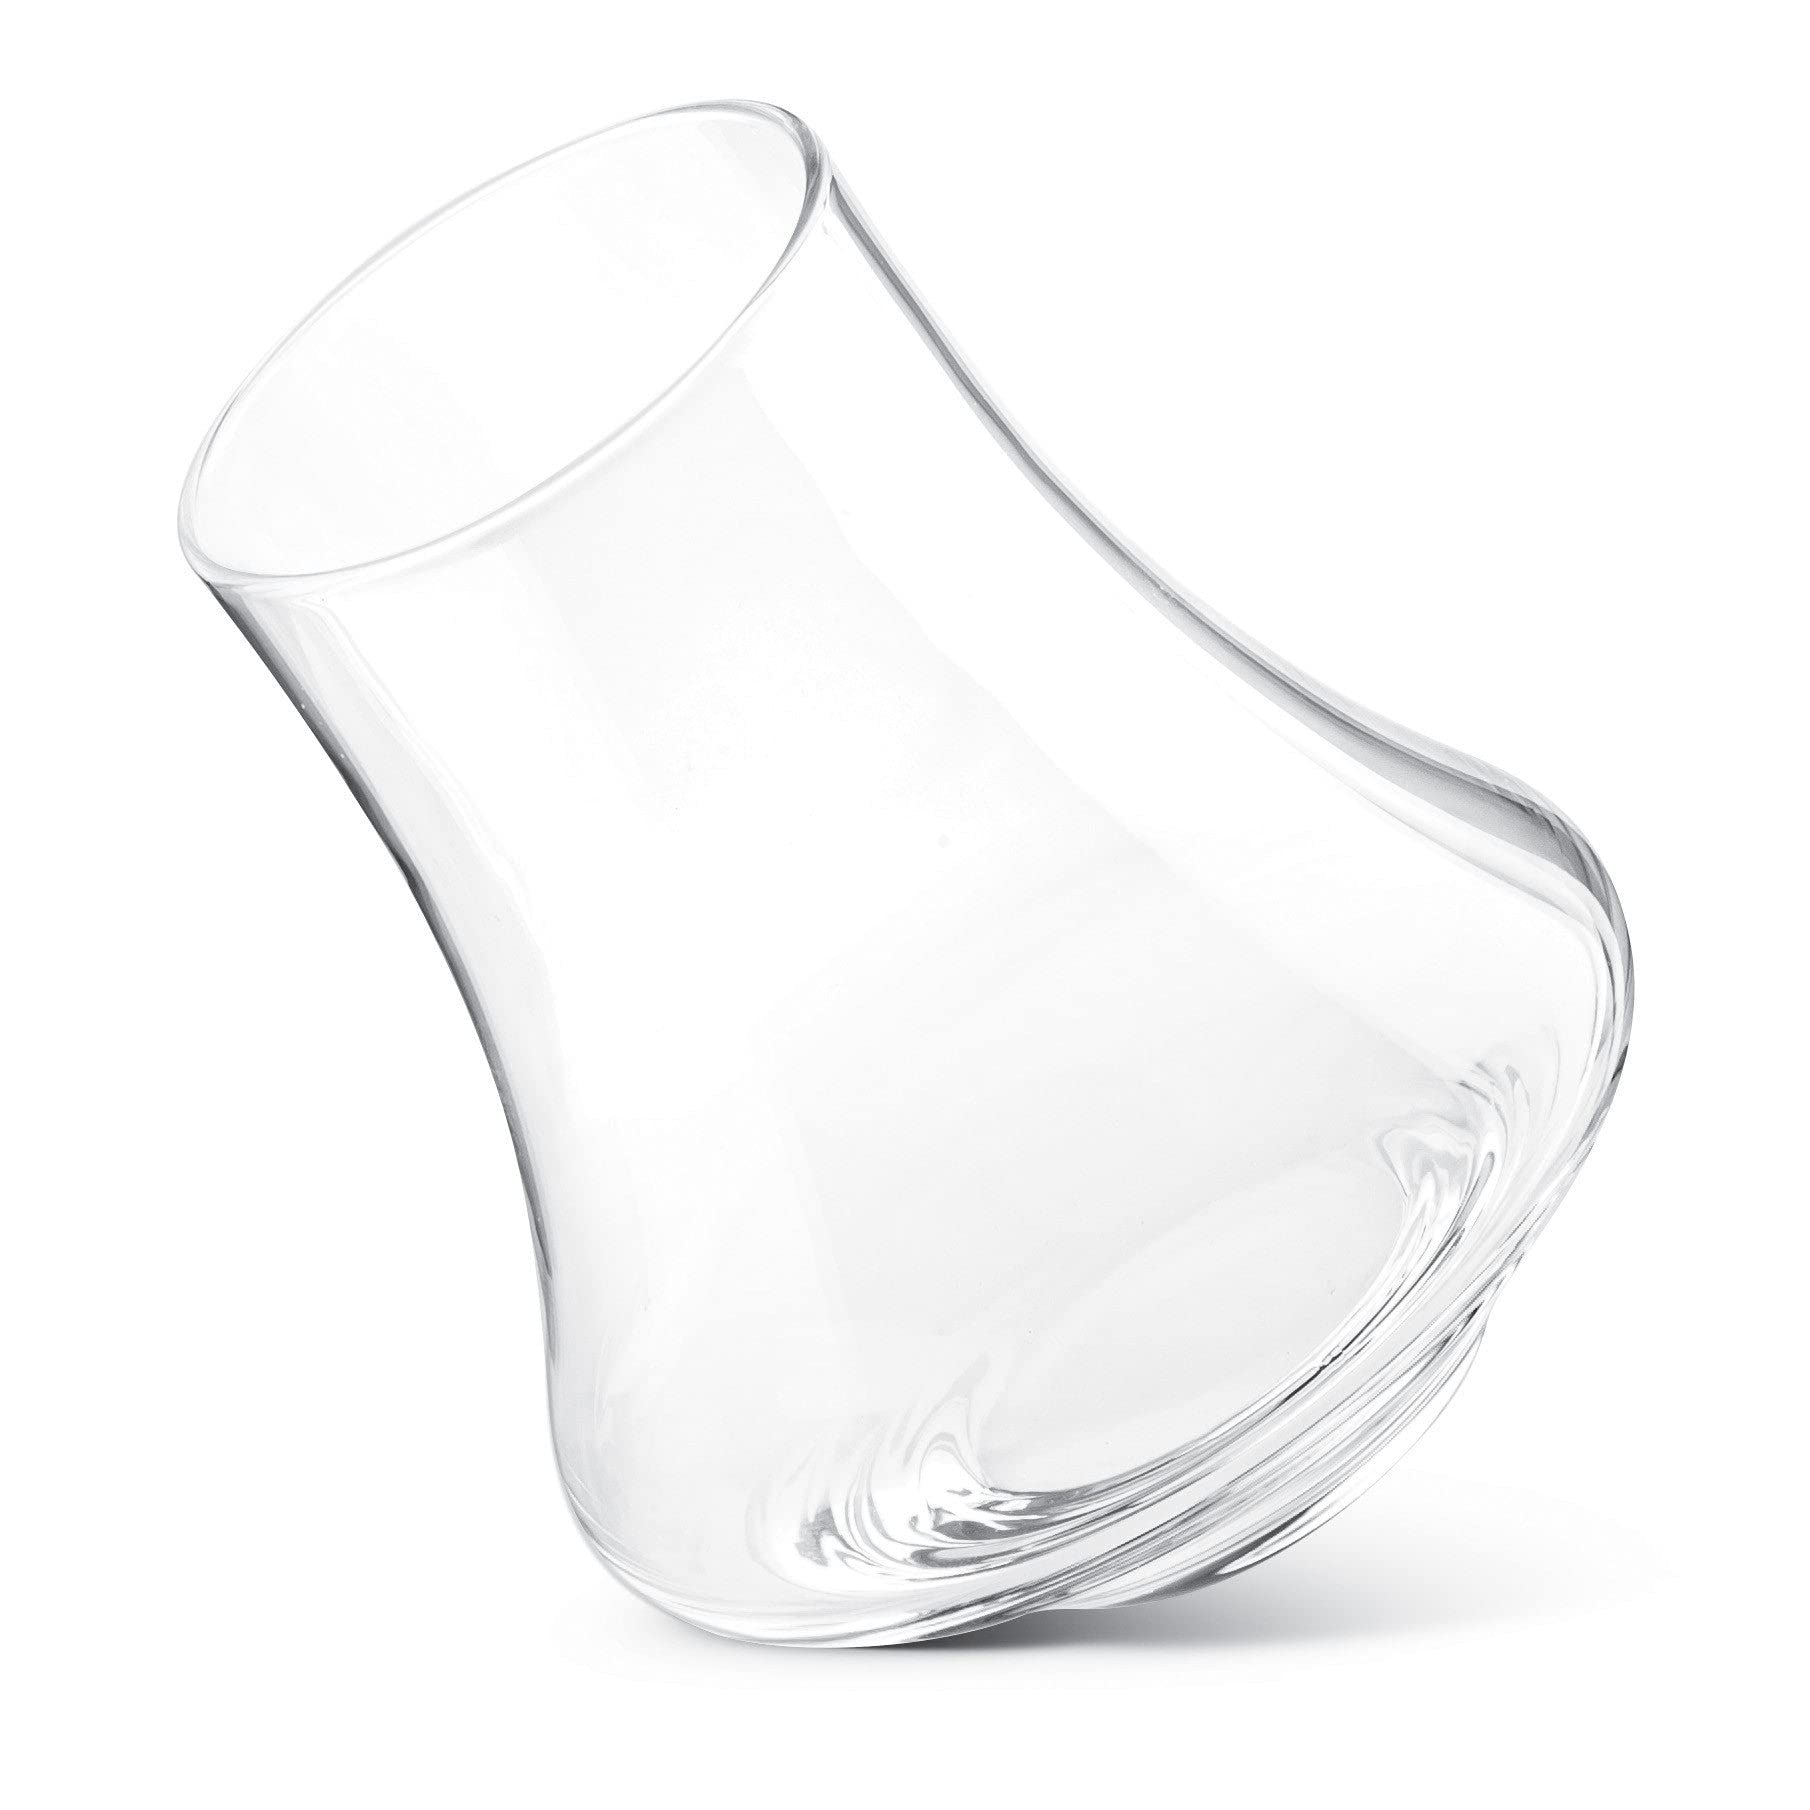 Final Touch Revolve Spinning & Rotating Spirits Tasting Glass for Whiskey, Gin, Rum, Tequila & Other Spirits (LFG4141)